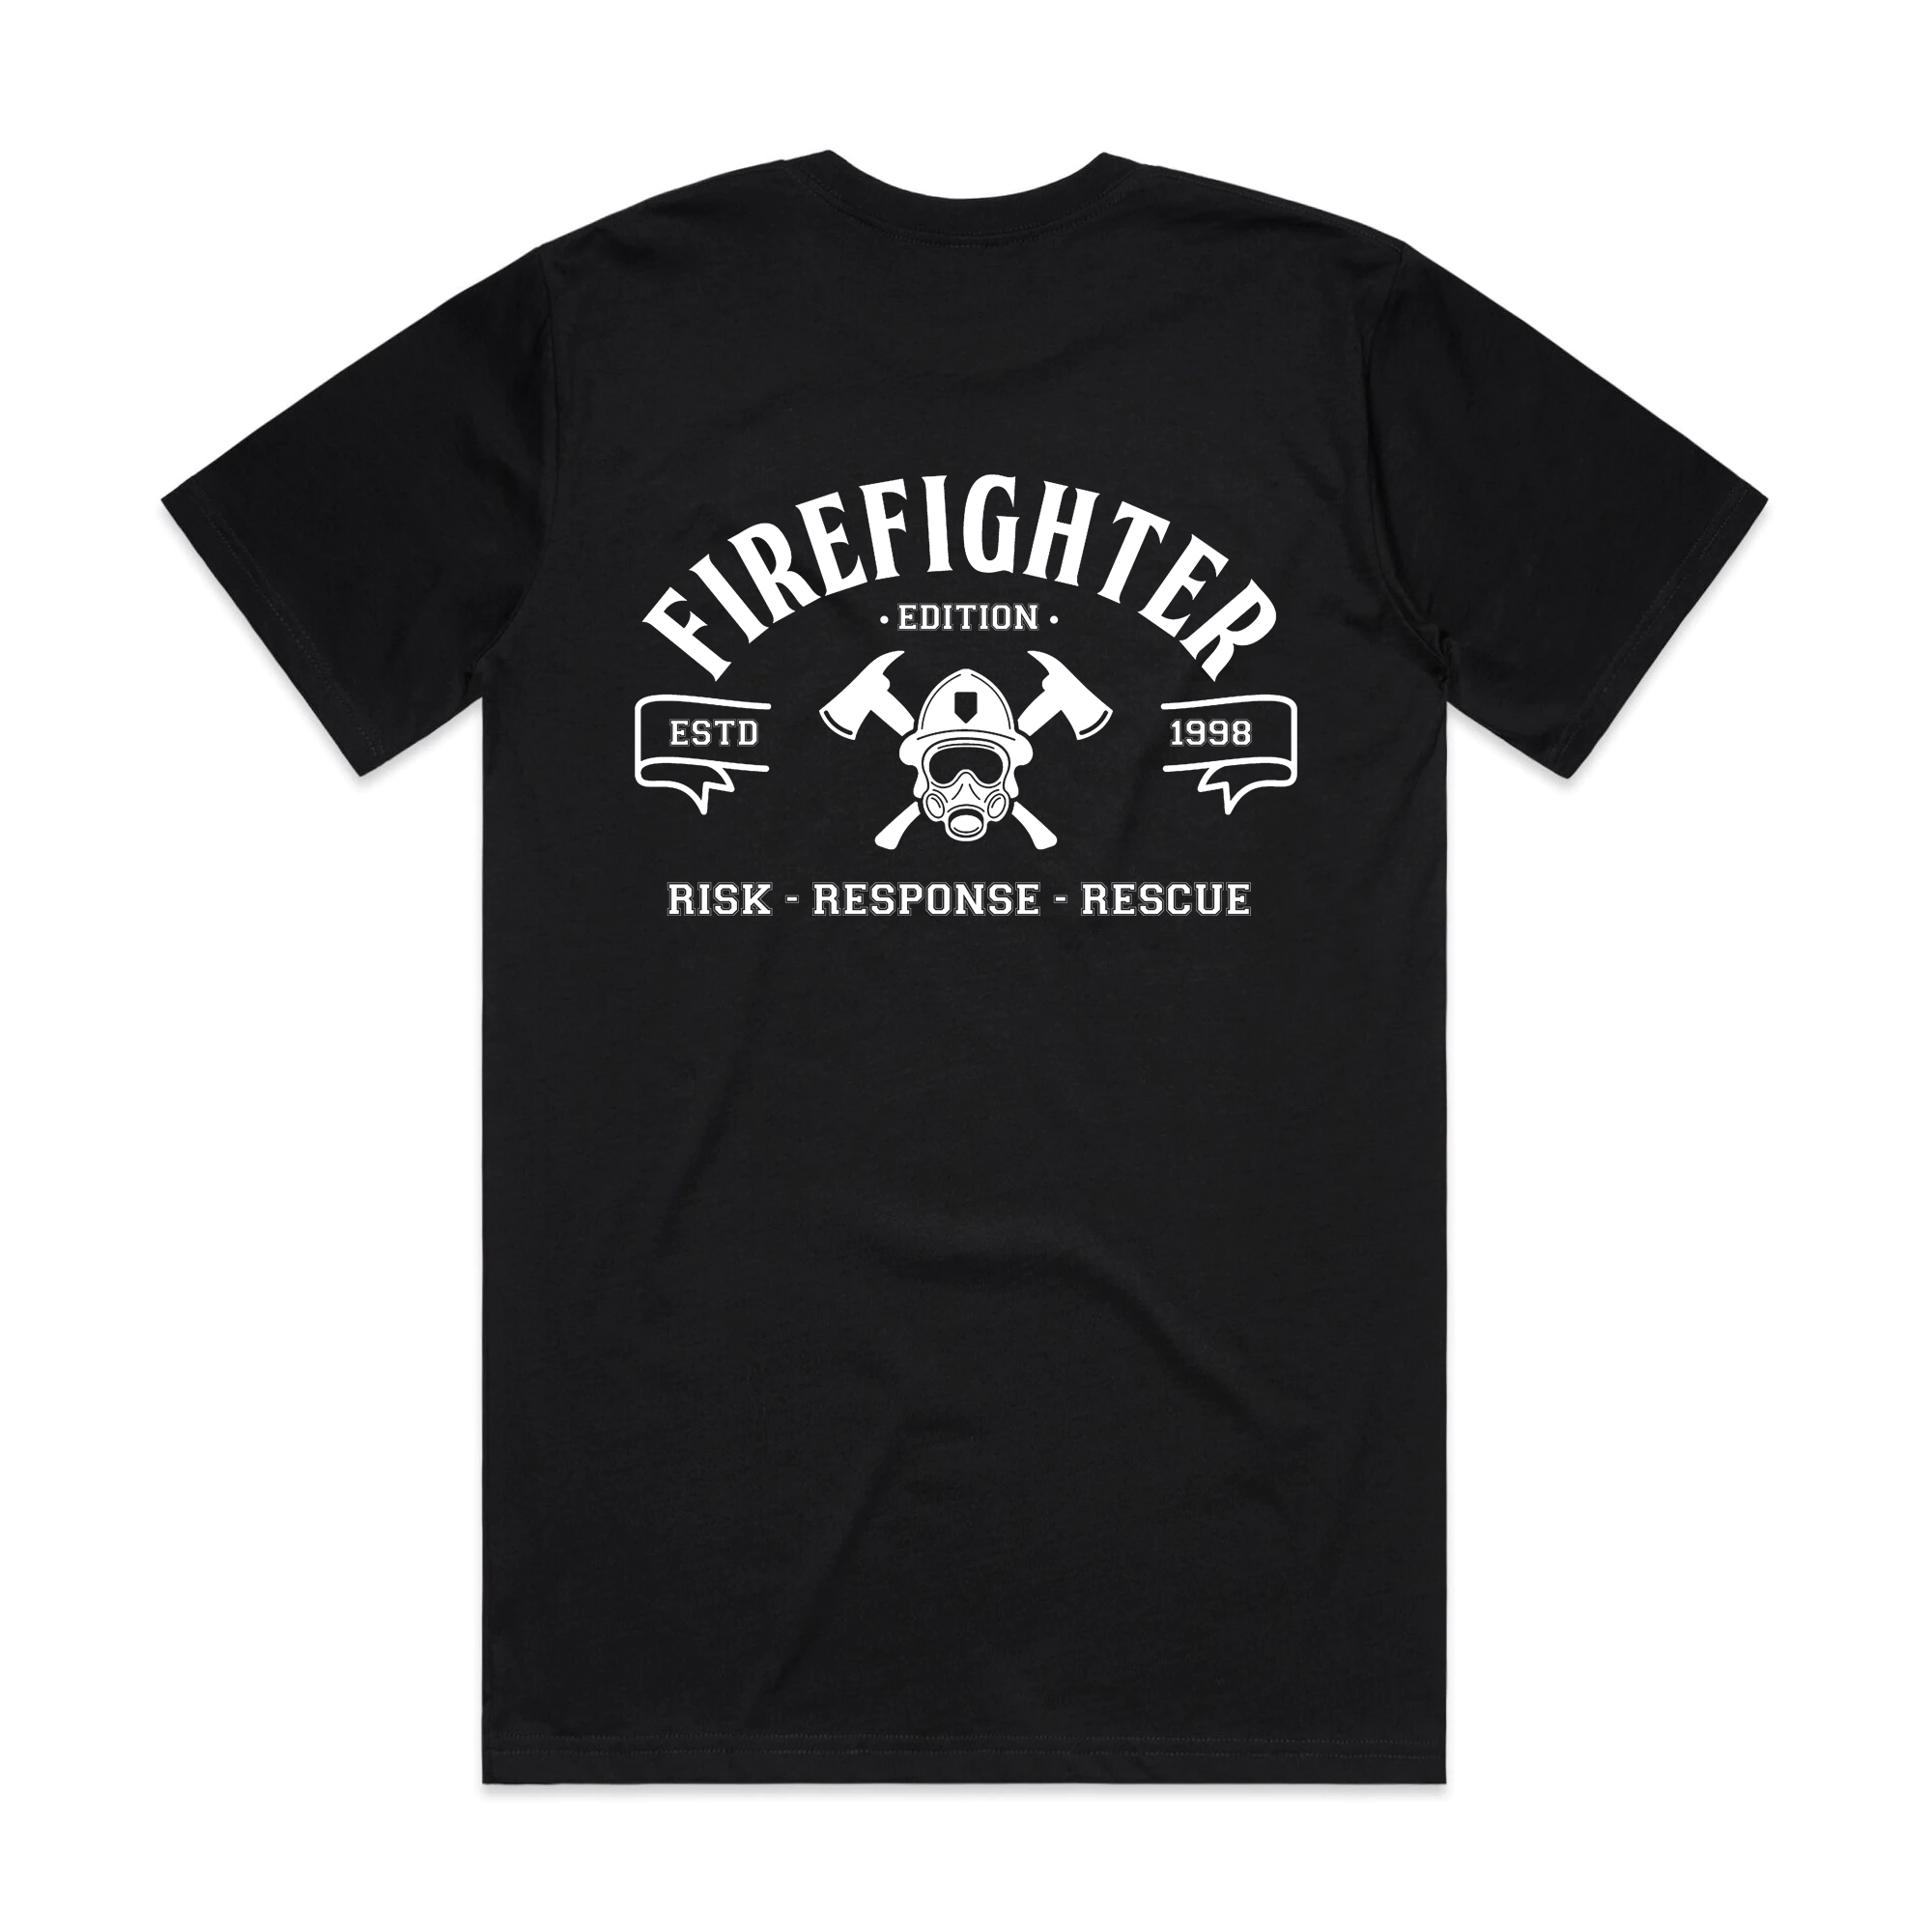 FIREFIGHTER EDITION T-SHIRT Description • Relaxed Fit• Crew Neck• Heavy Weight, 220 GSM, 22-singles• 100% Combed Cotton• Preshrunk to minimise shrinkage